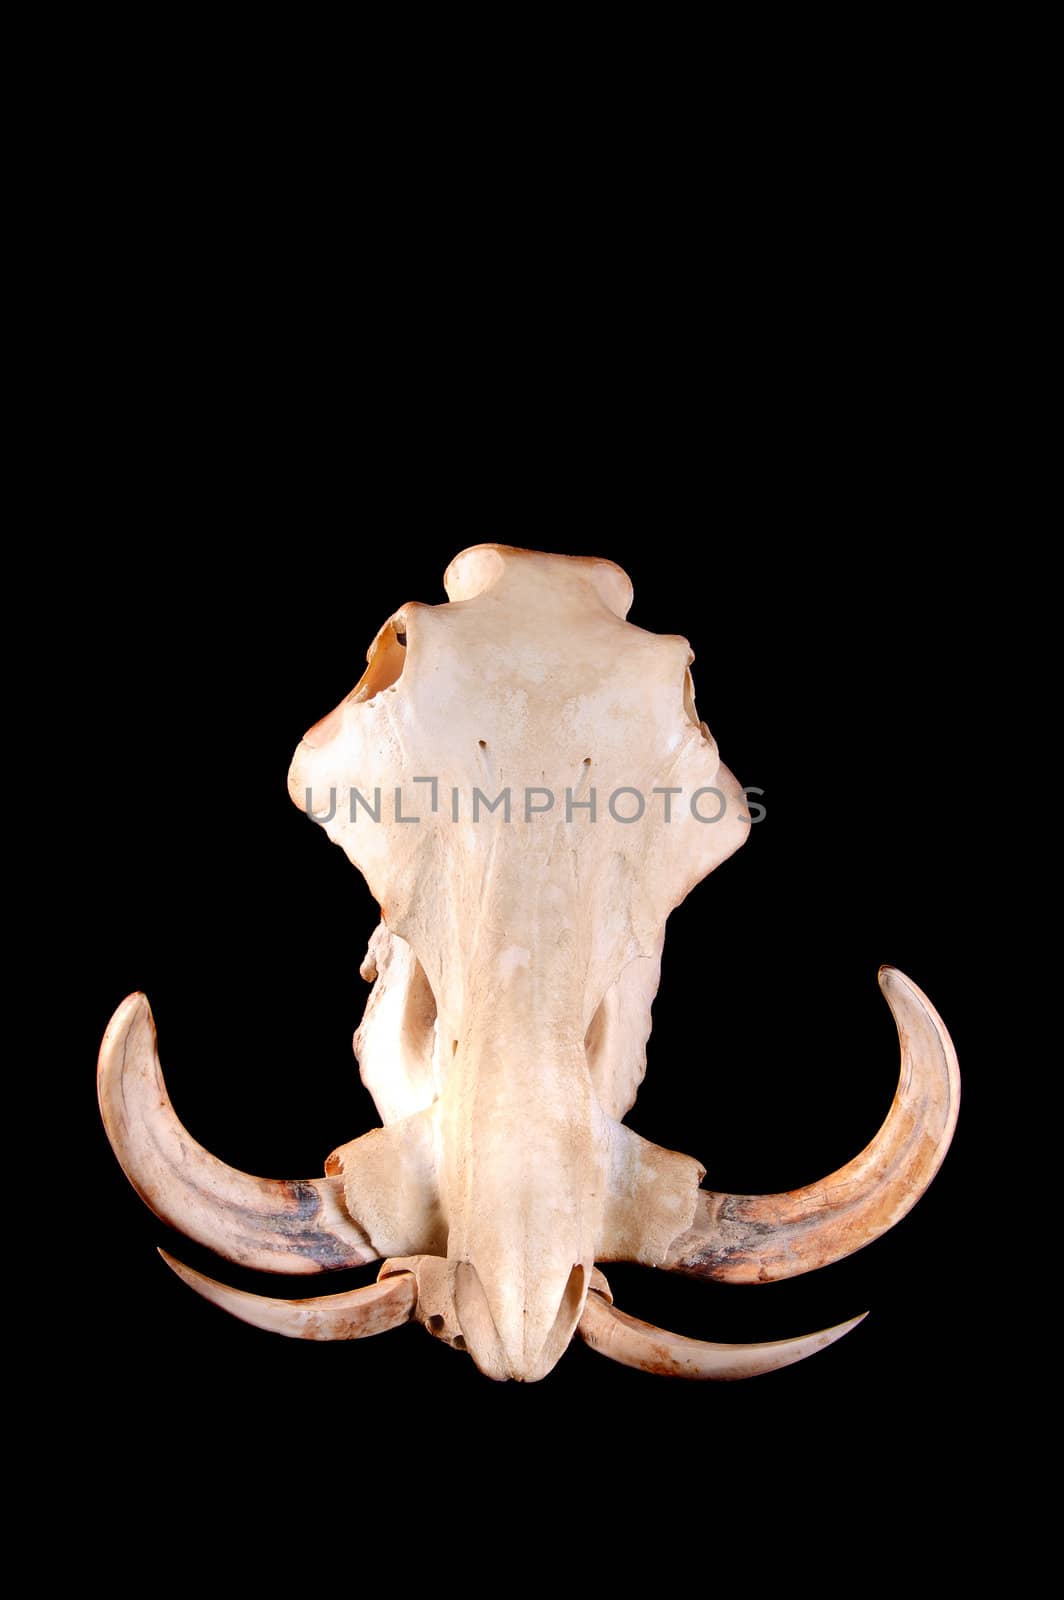 skull of an African Wart hog on a black background